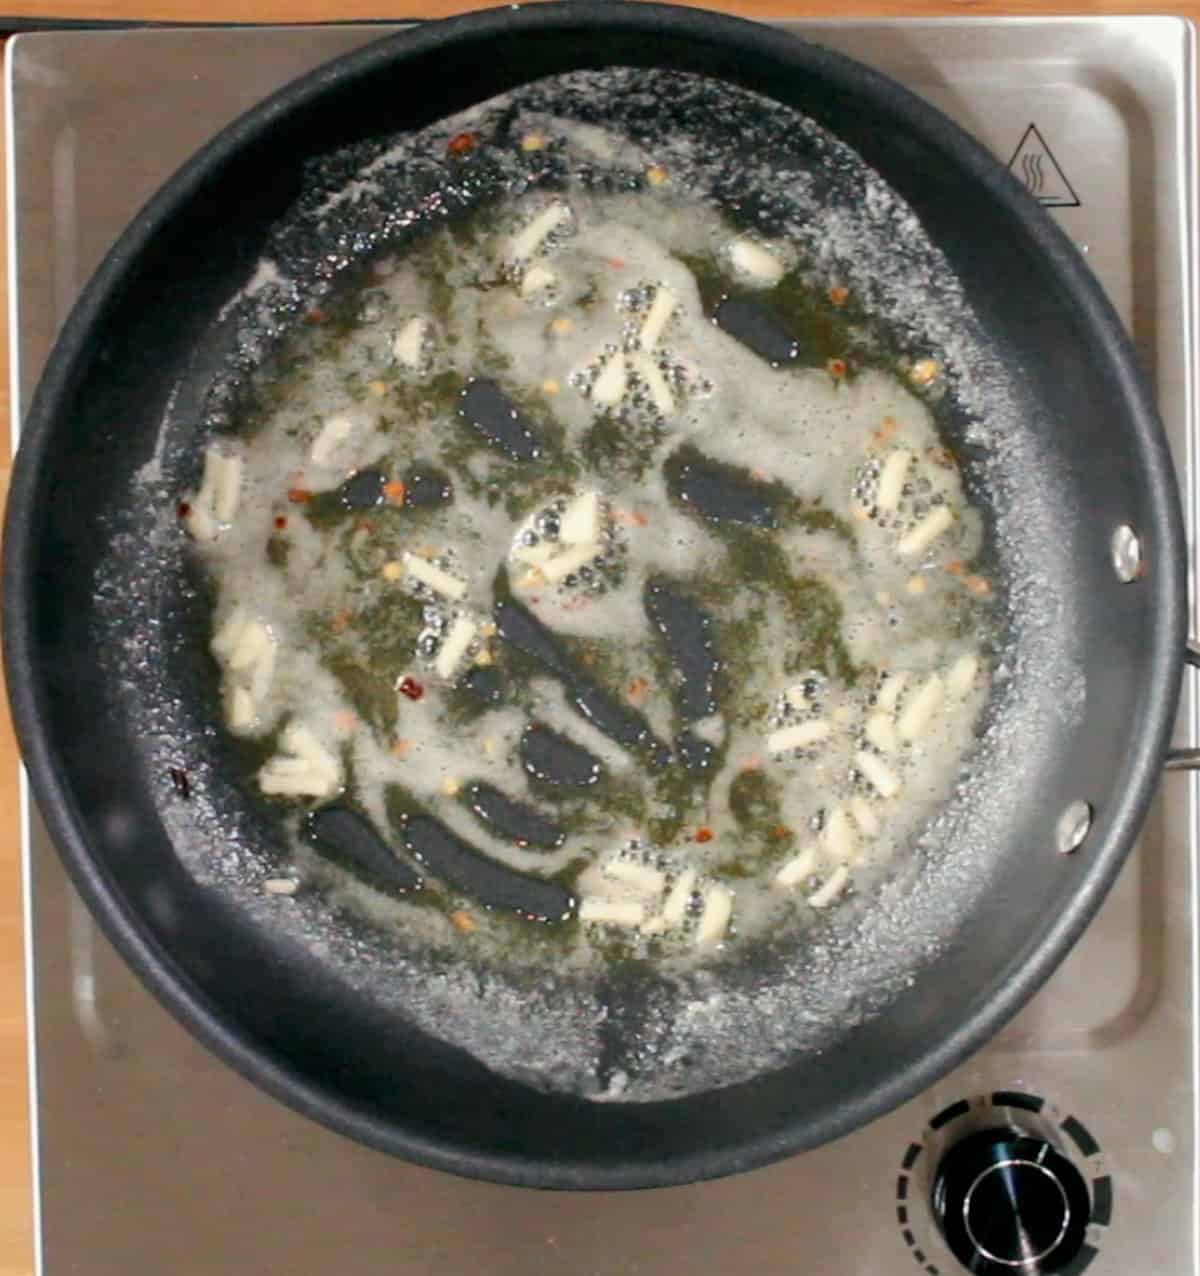 garlic cooking in butter in a small skillet